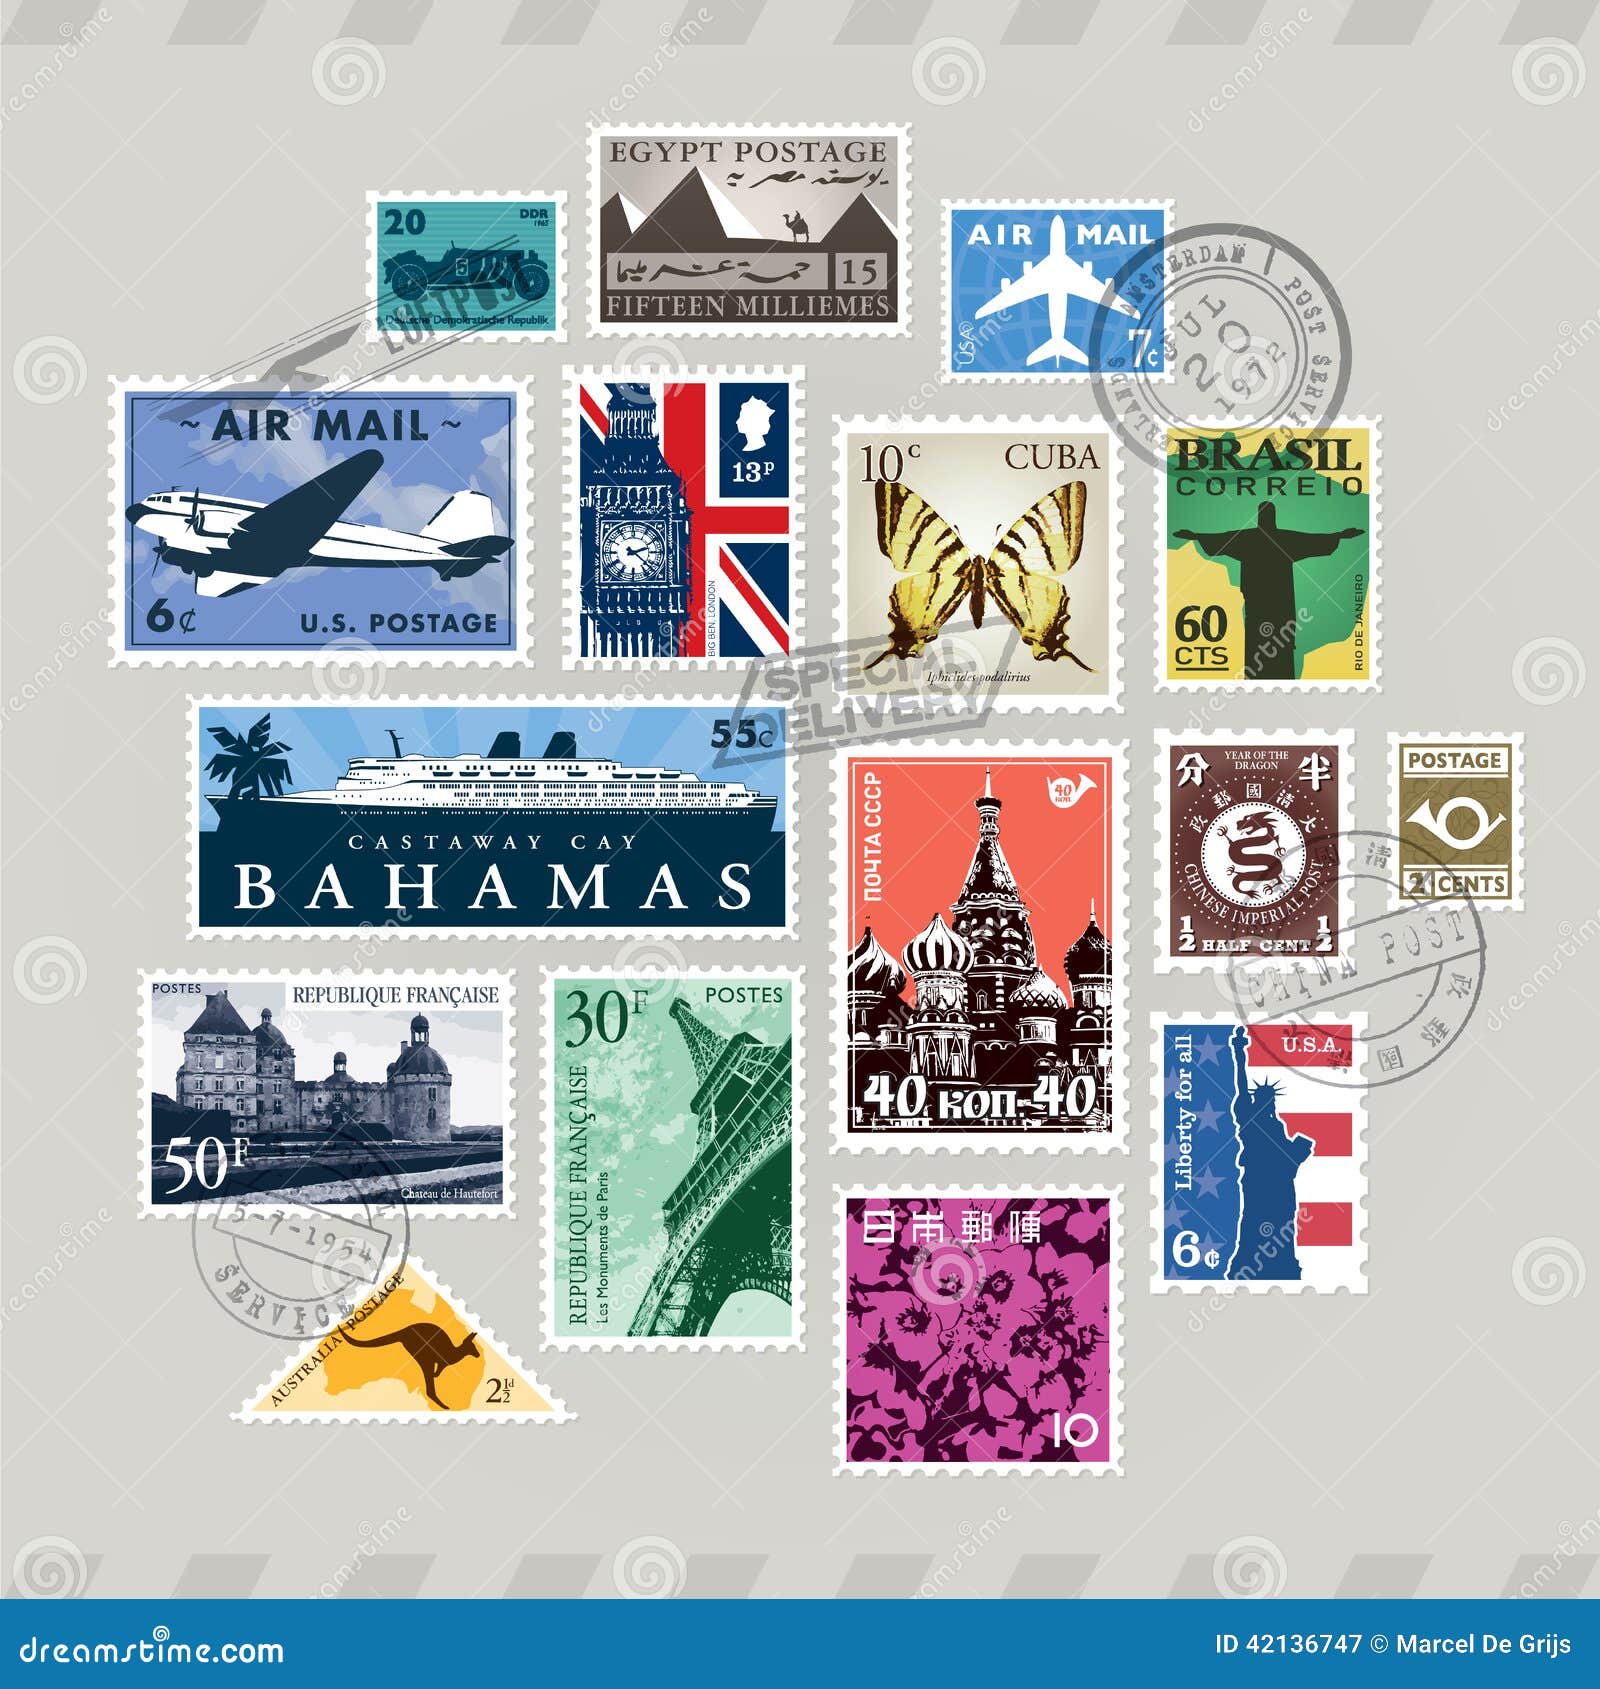 Post stamps stock vector. Illustration of england, locations - 42136747